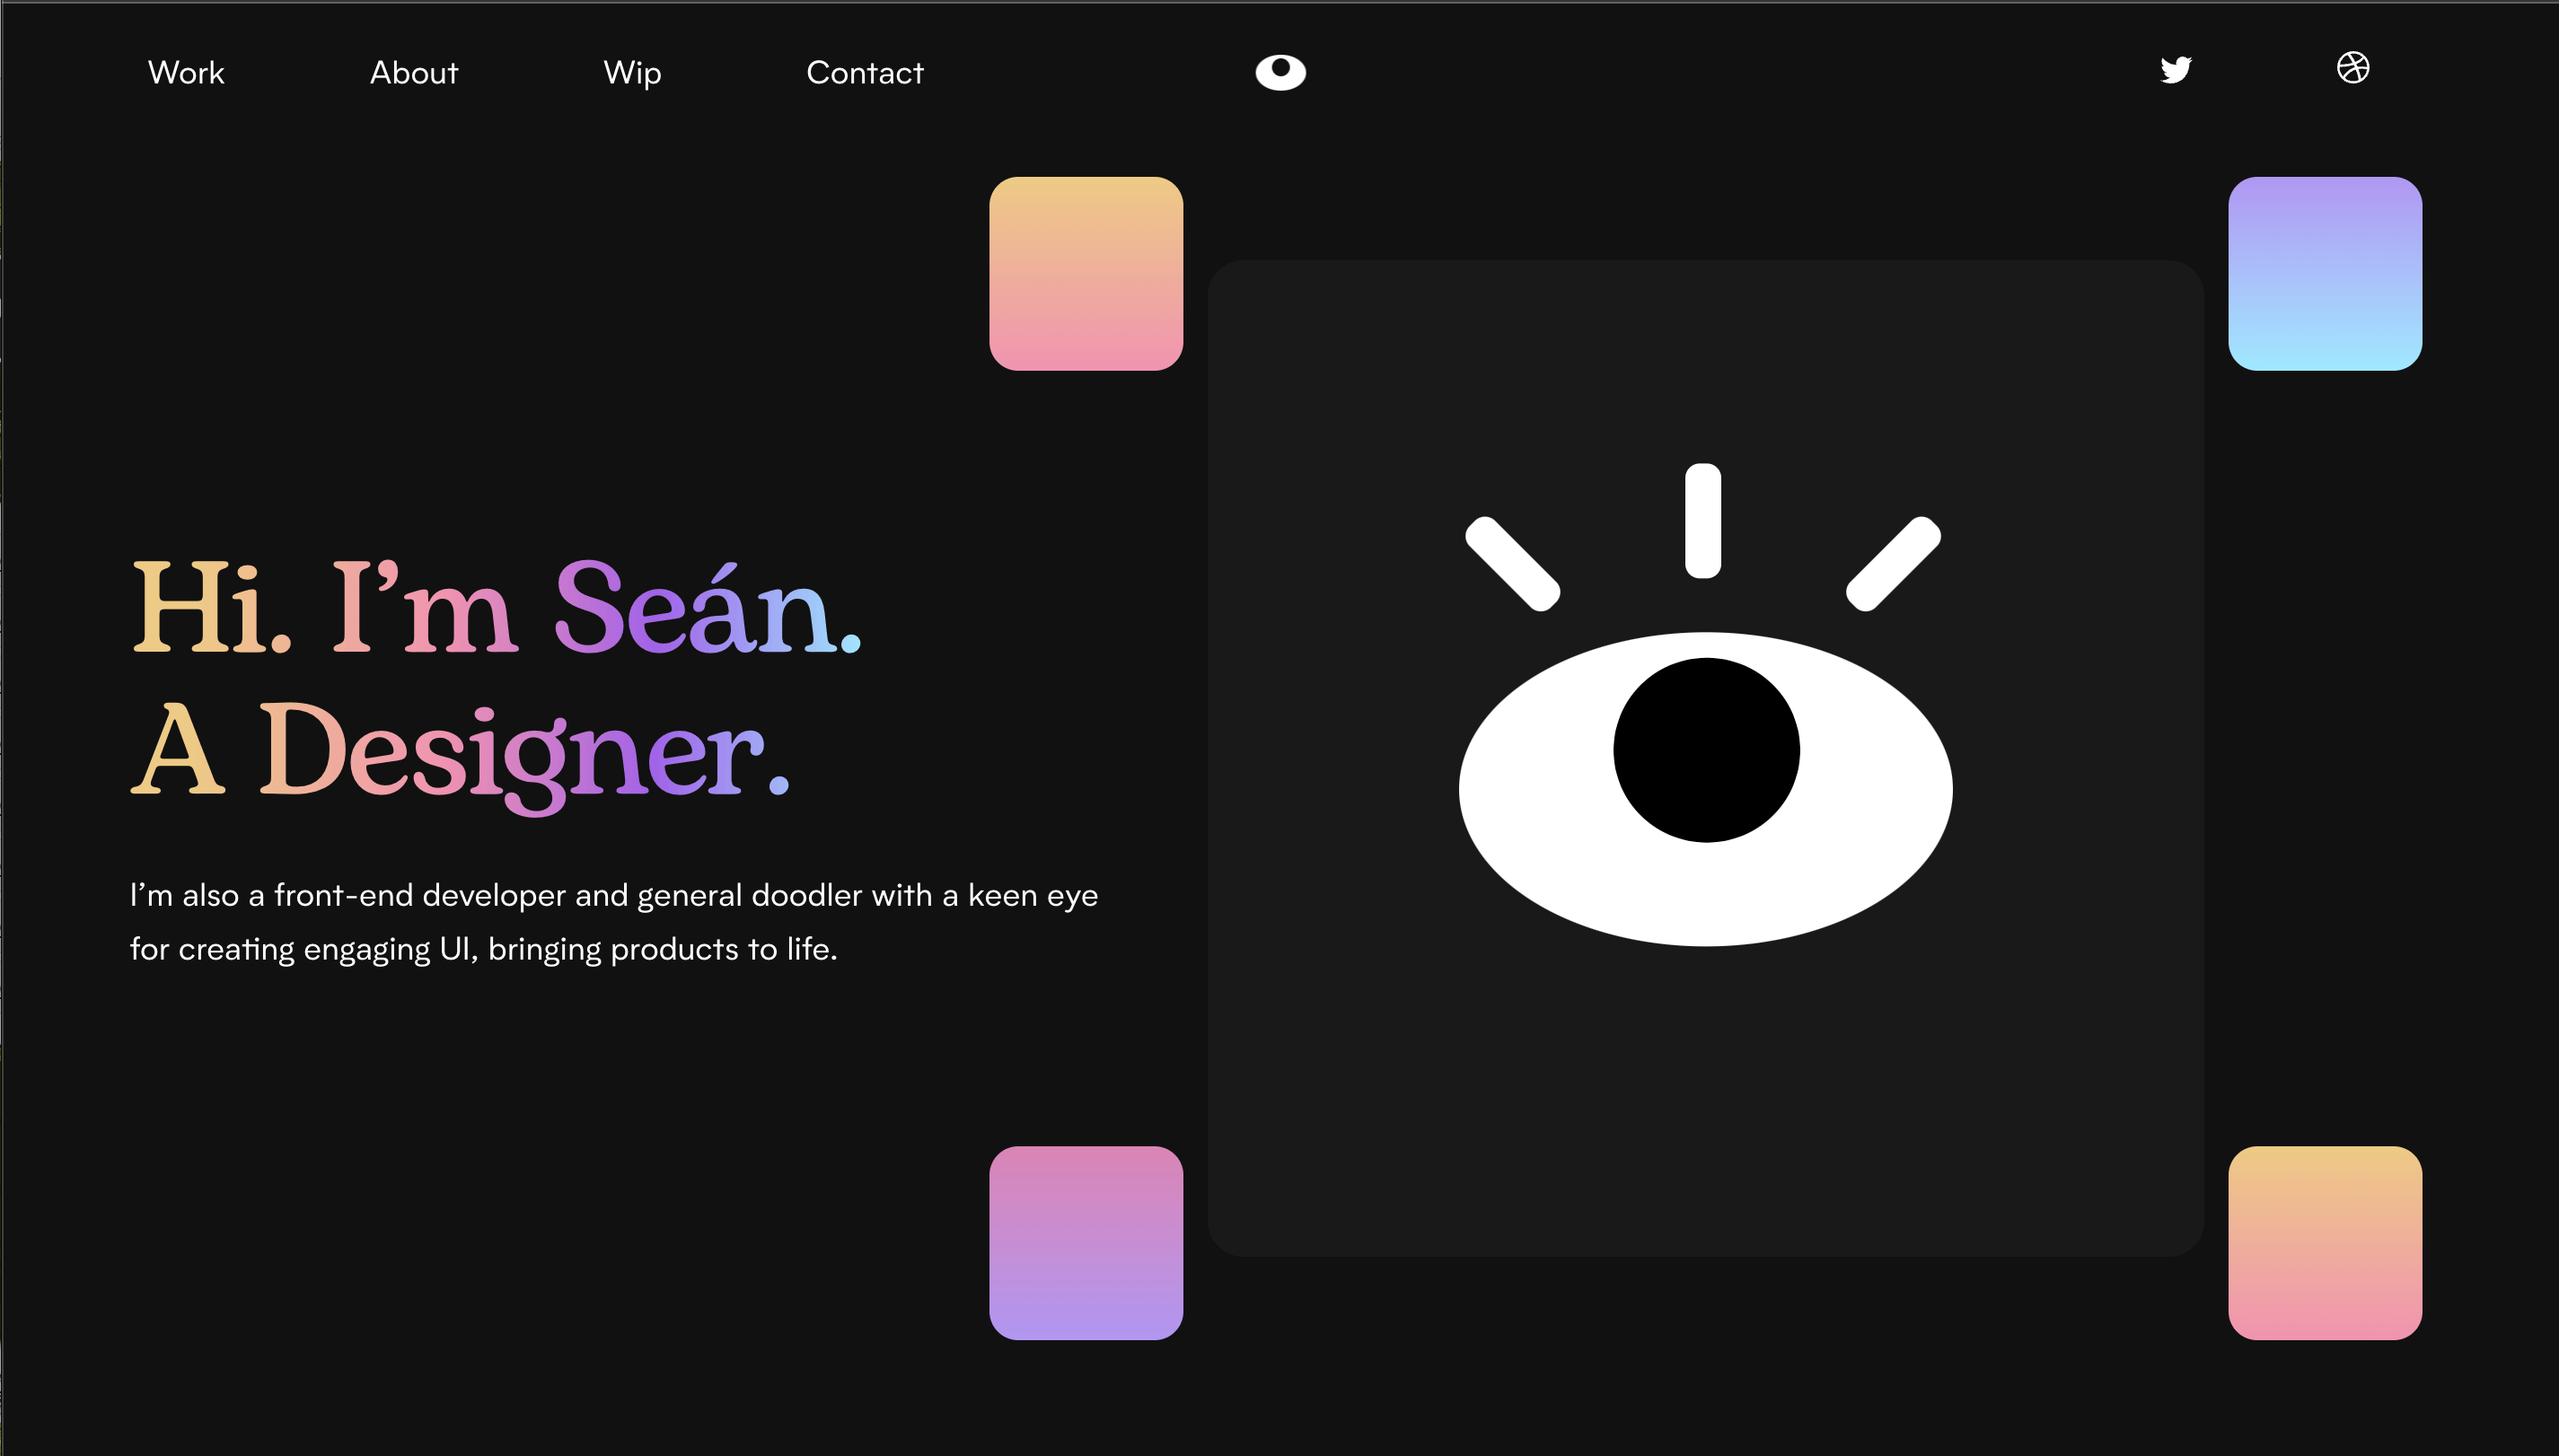 Sean Halpin's homepage with a black background and pastel gradient features. The text reads "Hi. I'm Sean. A Designer. I'm also a front-end developer and general doodler with a keen eye for engaging UI, bringing products to life."